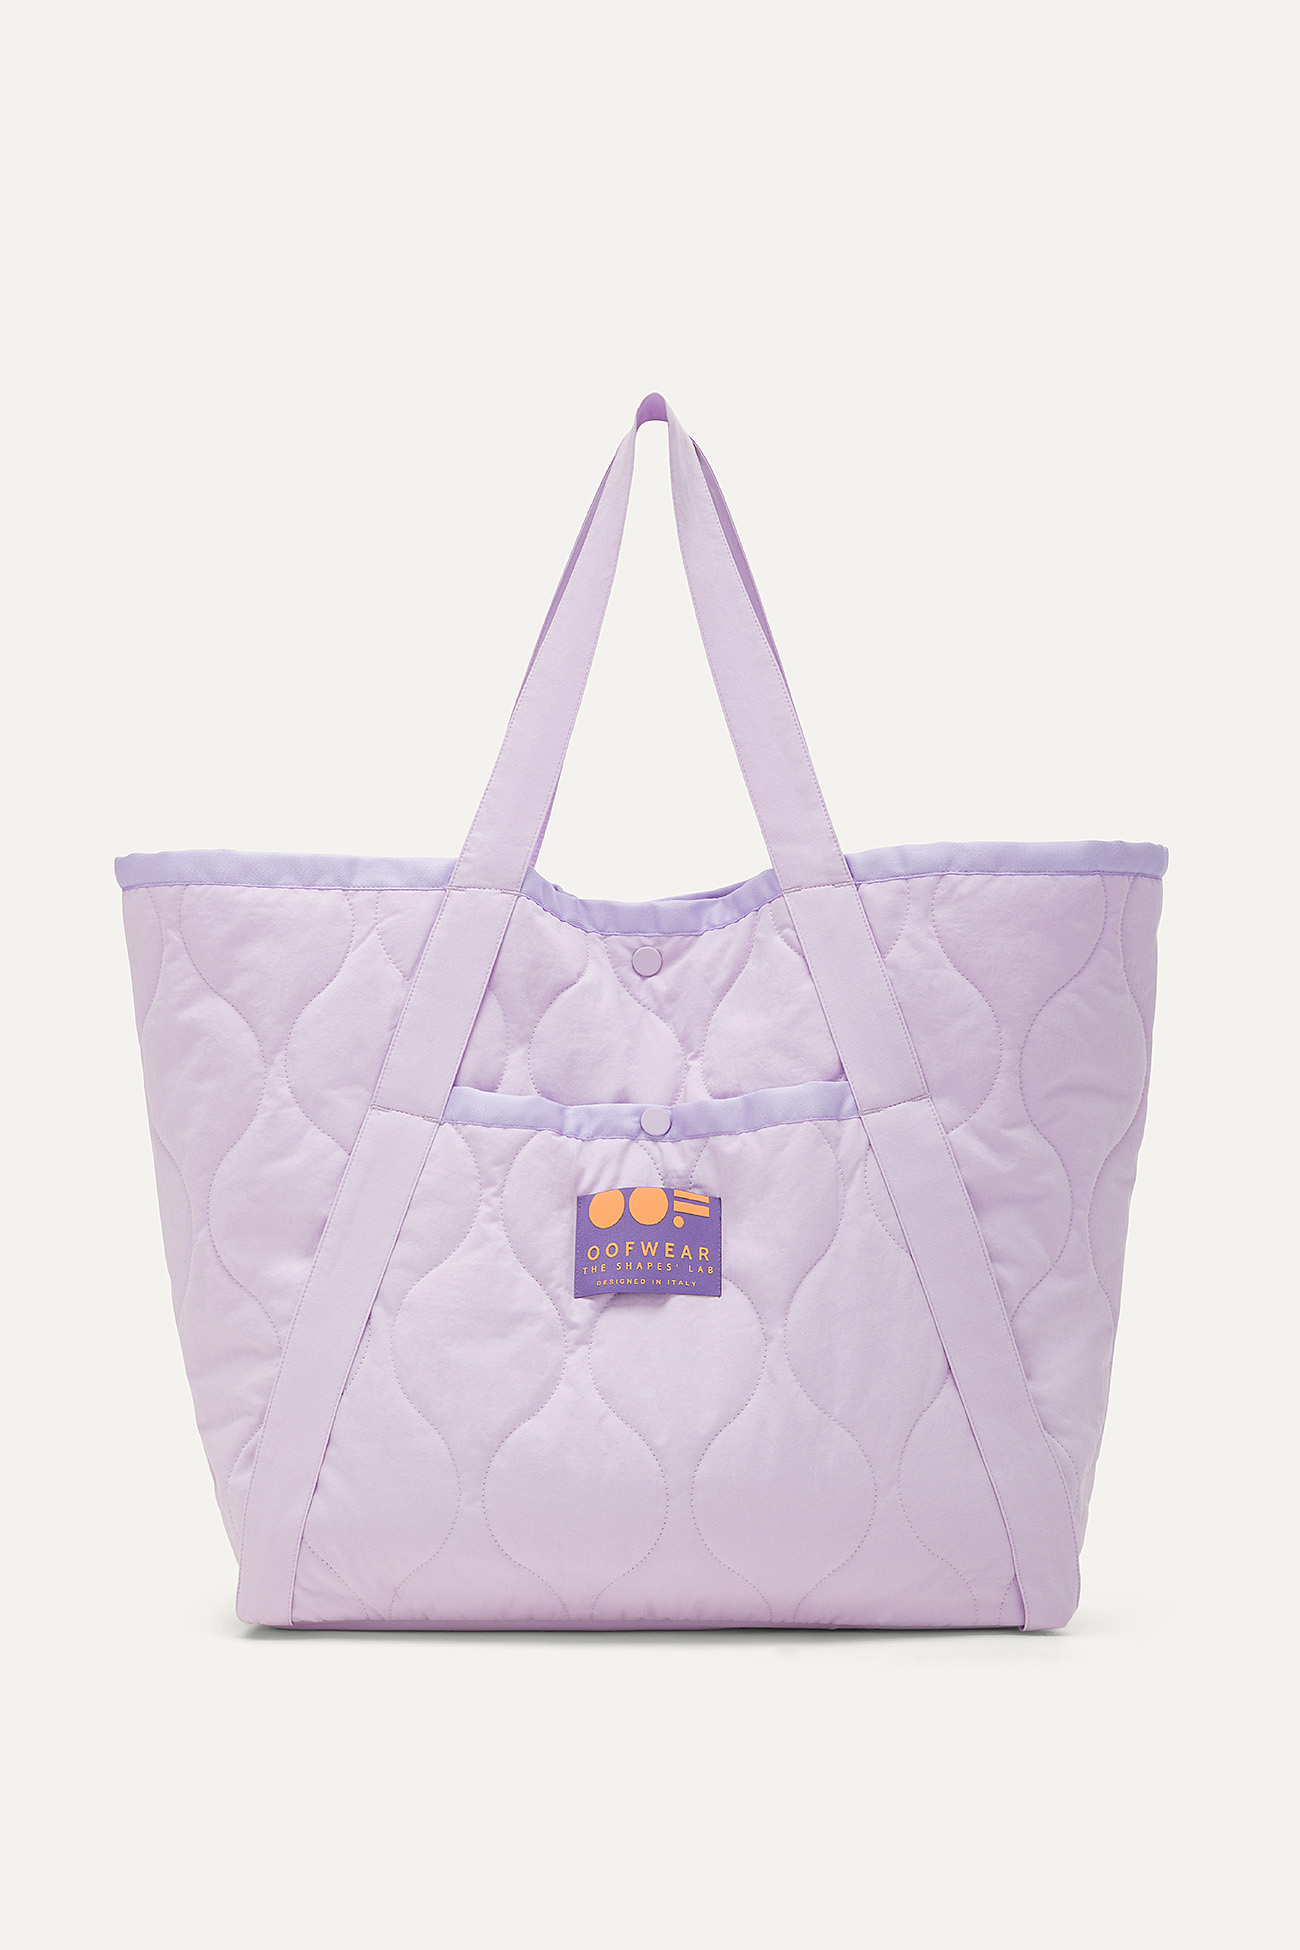 QUILTED COTTON SHOPPER BAG 3084 - LILAC - OOF WEAR